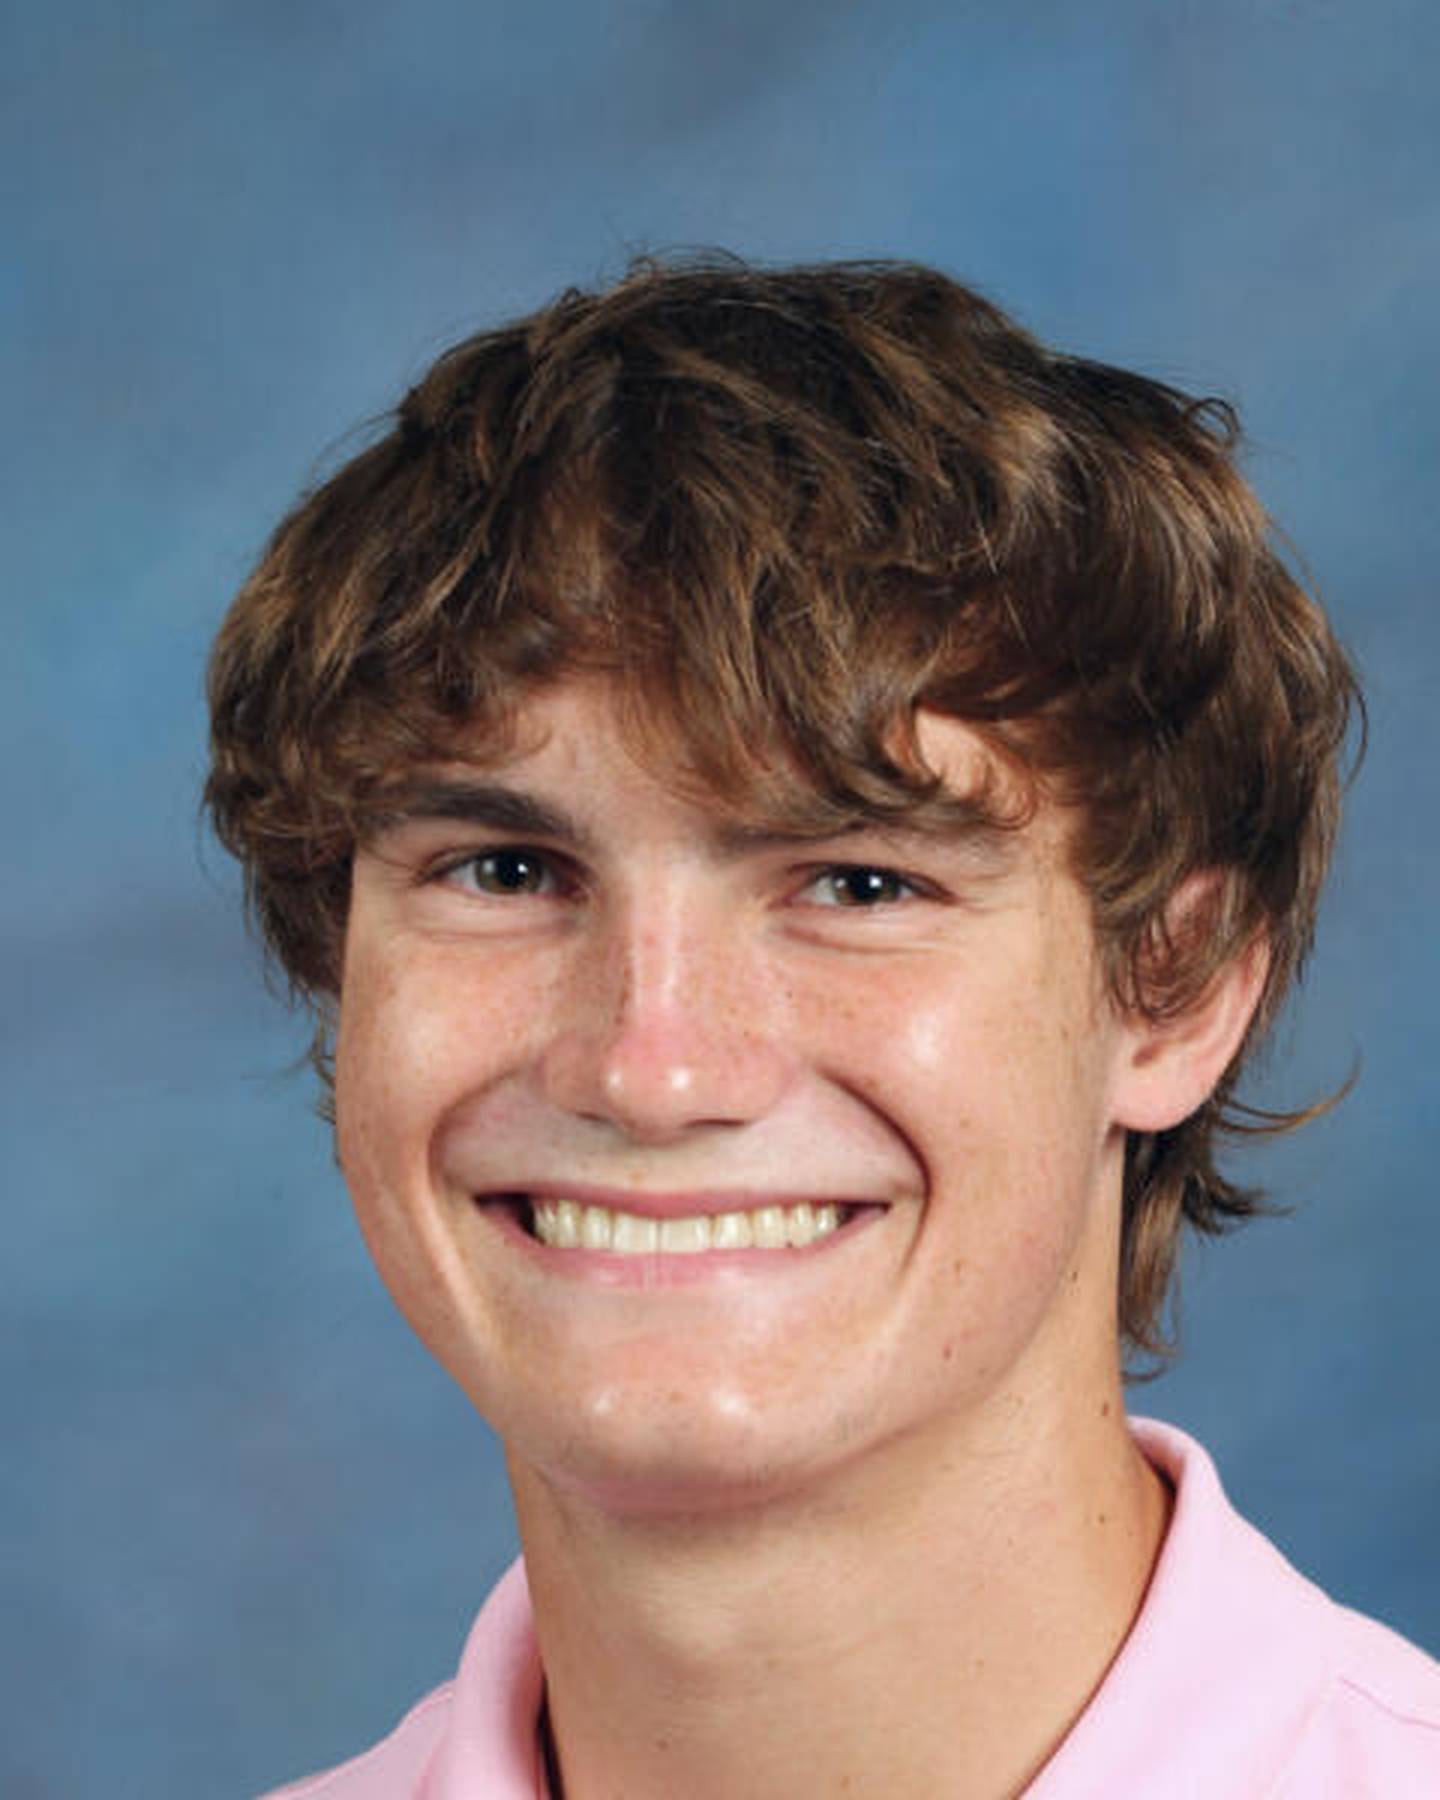 Joliet Catholic Academy named Charles O'Neill as a Student of the Month for October 2021.